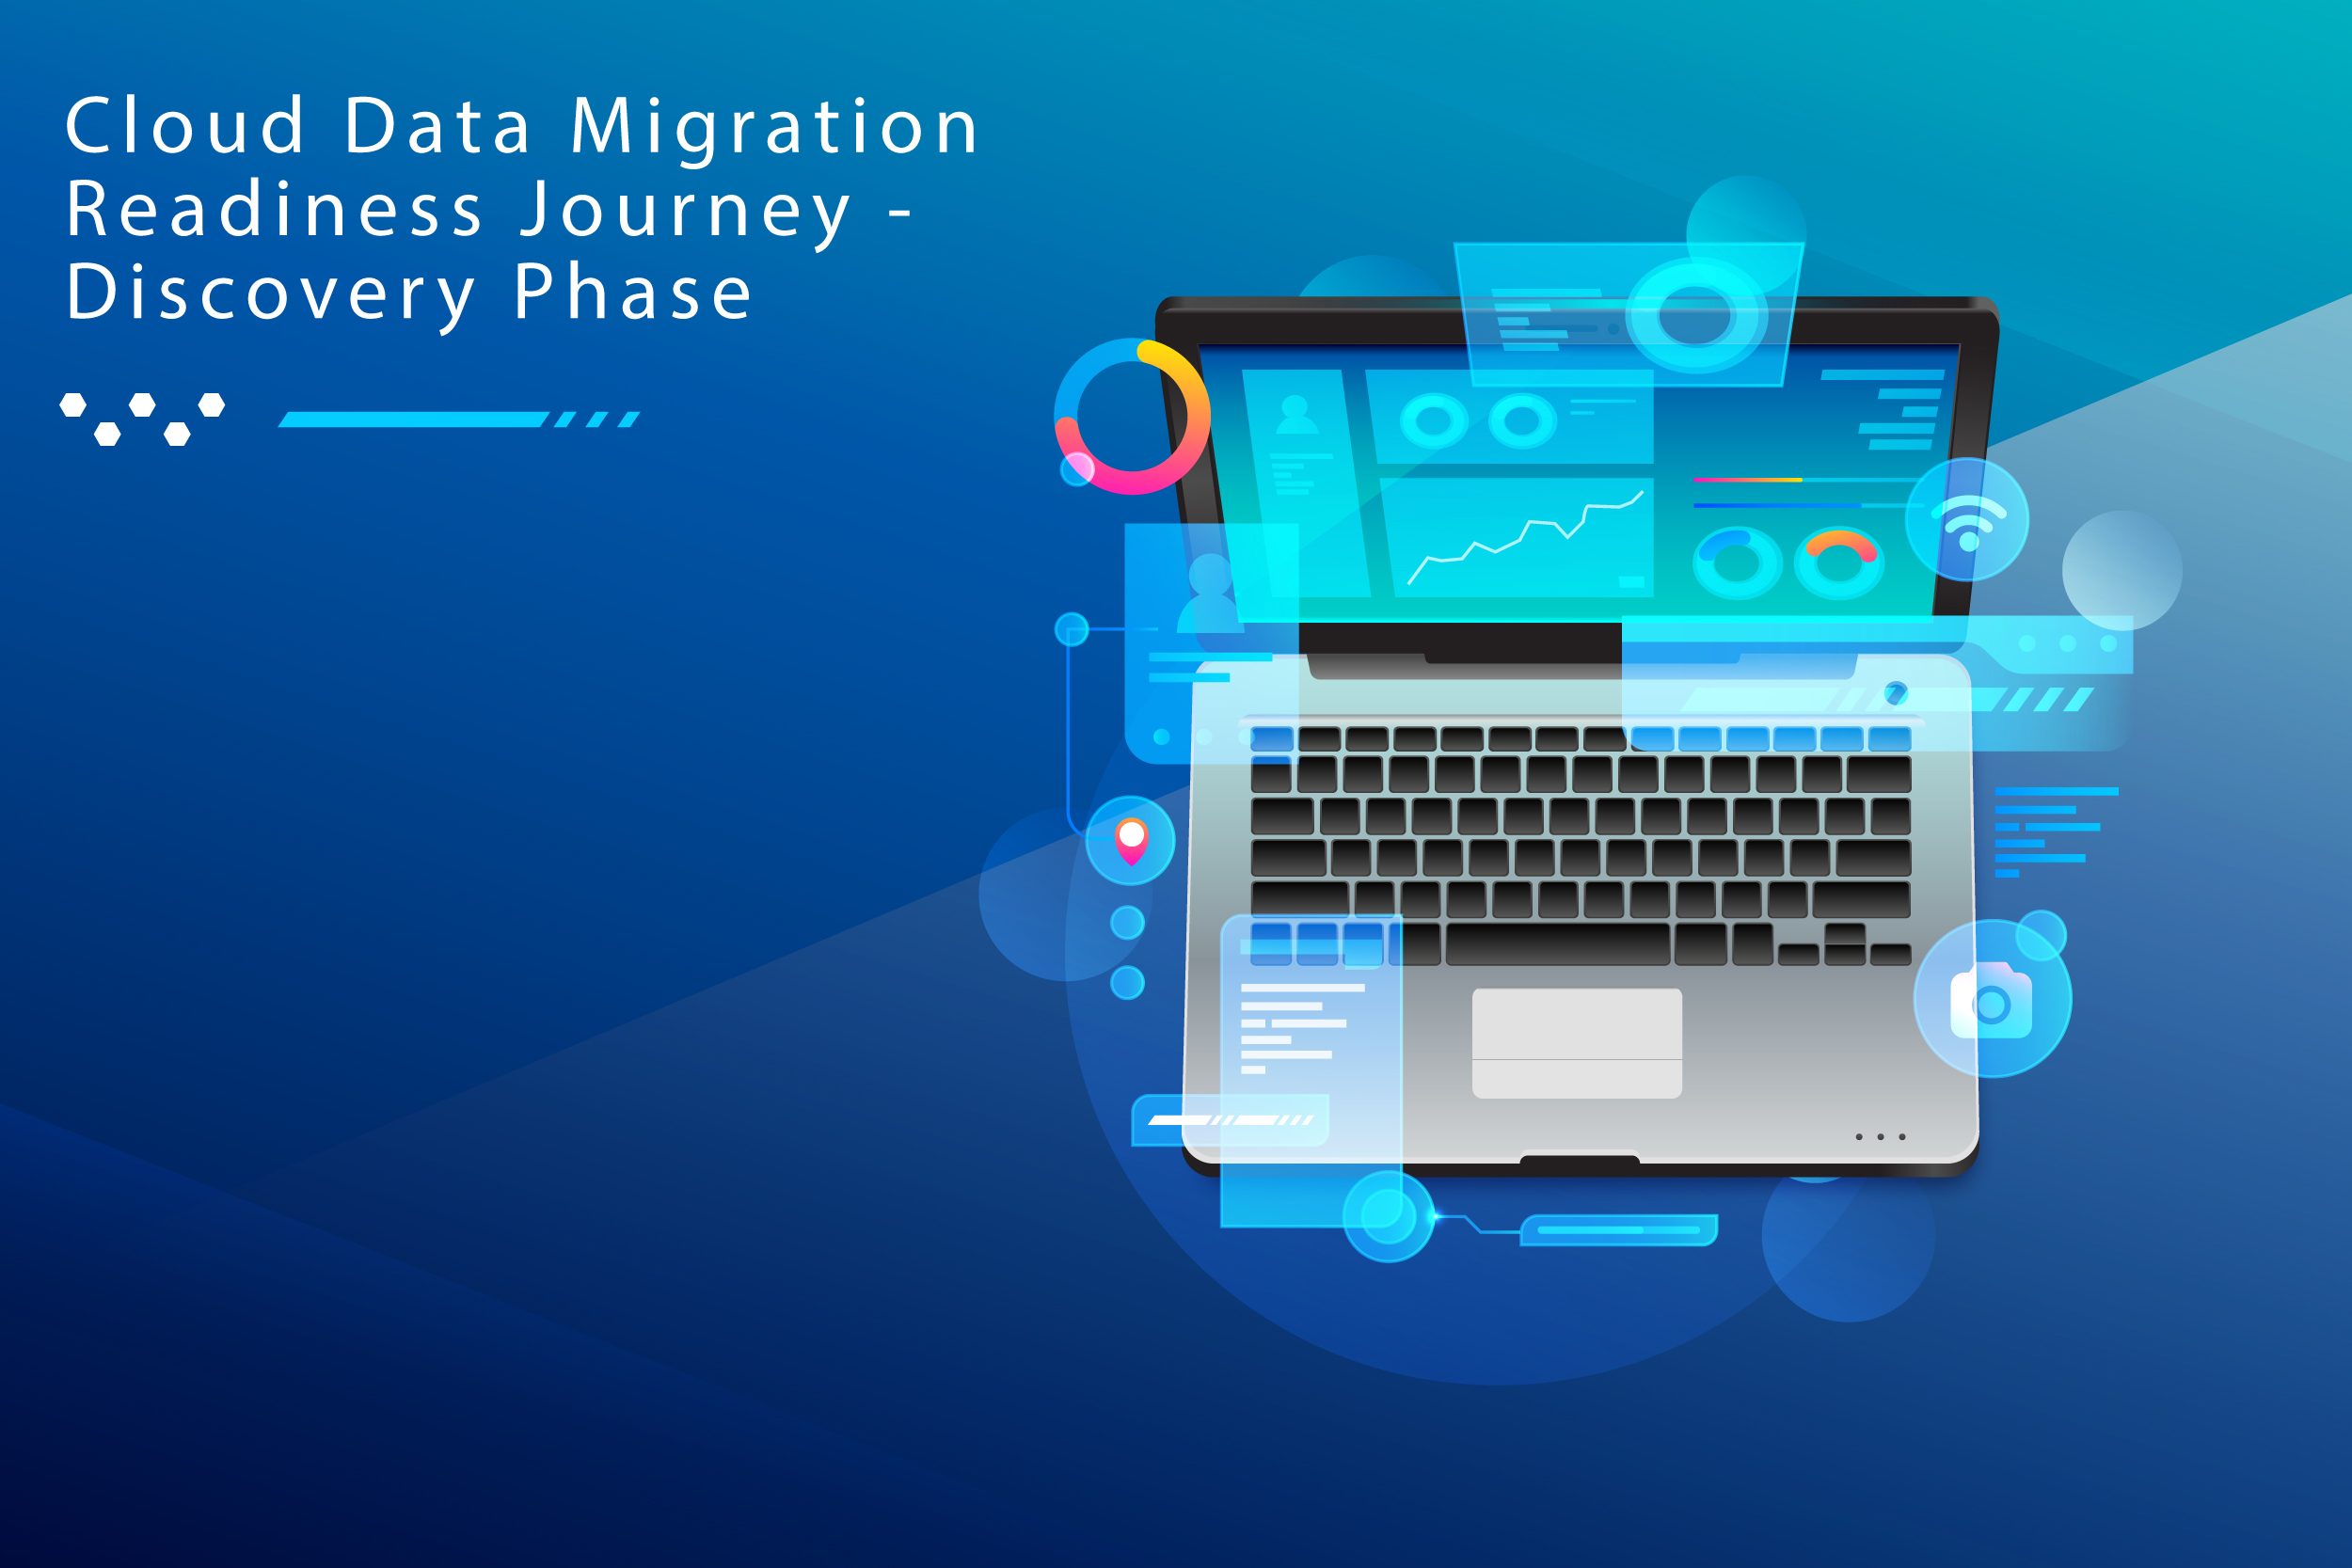 Cloud migration readiness journey – Discovery Phase